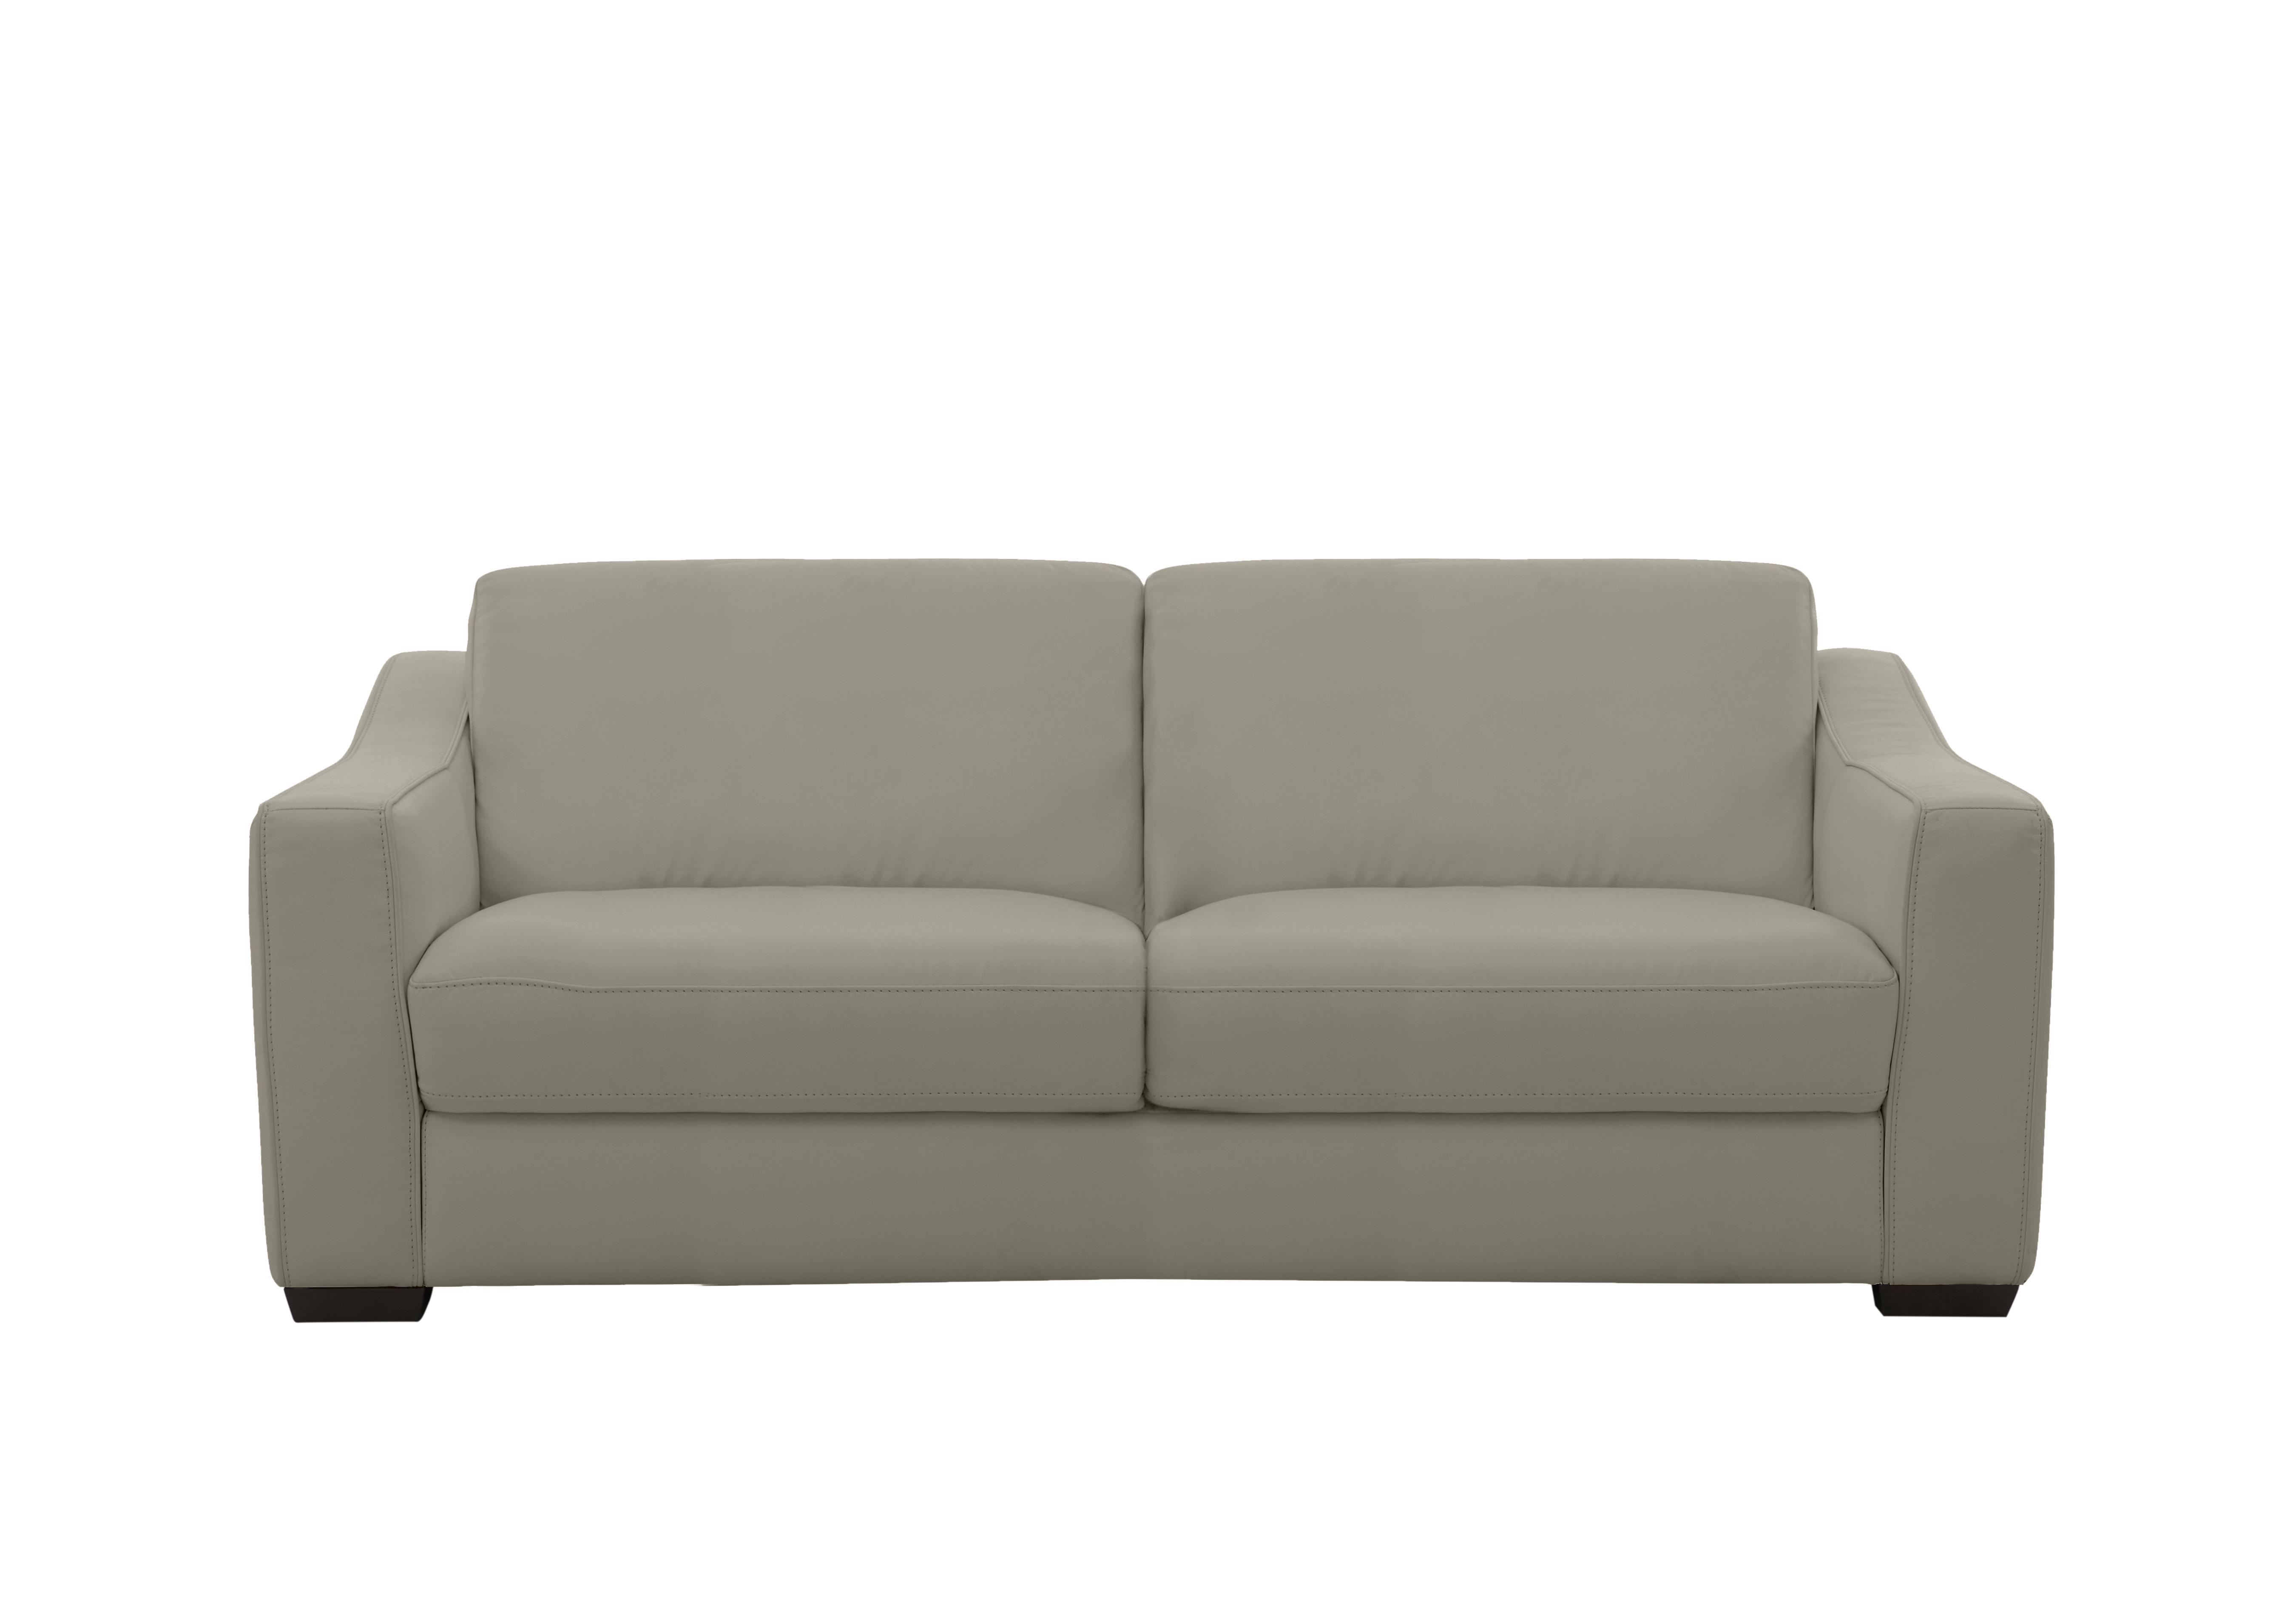 Optimus 3 Seater Leather Sofa in Bv-946b Silver Grey on Furniture Village